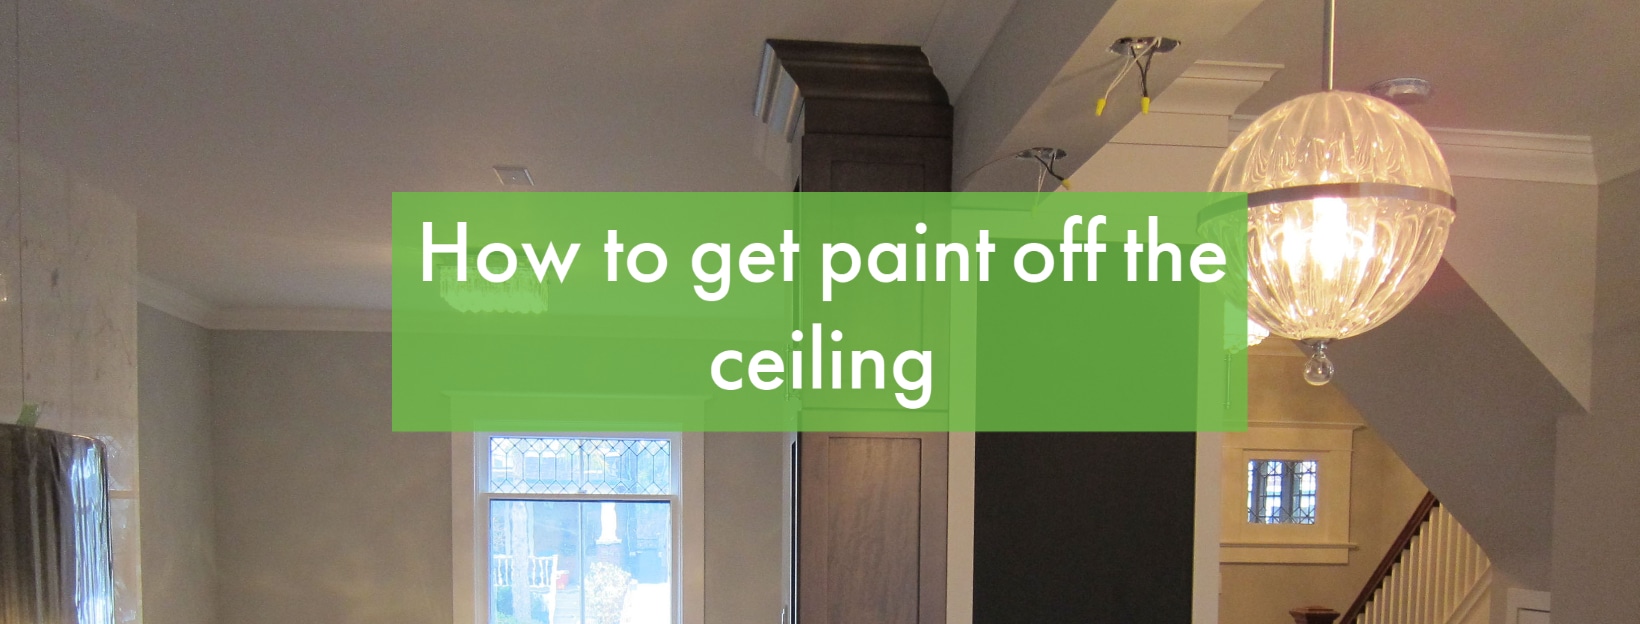 How To Get Paint Off The Ceiling Home